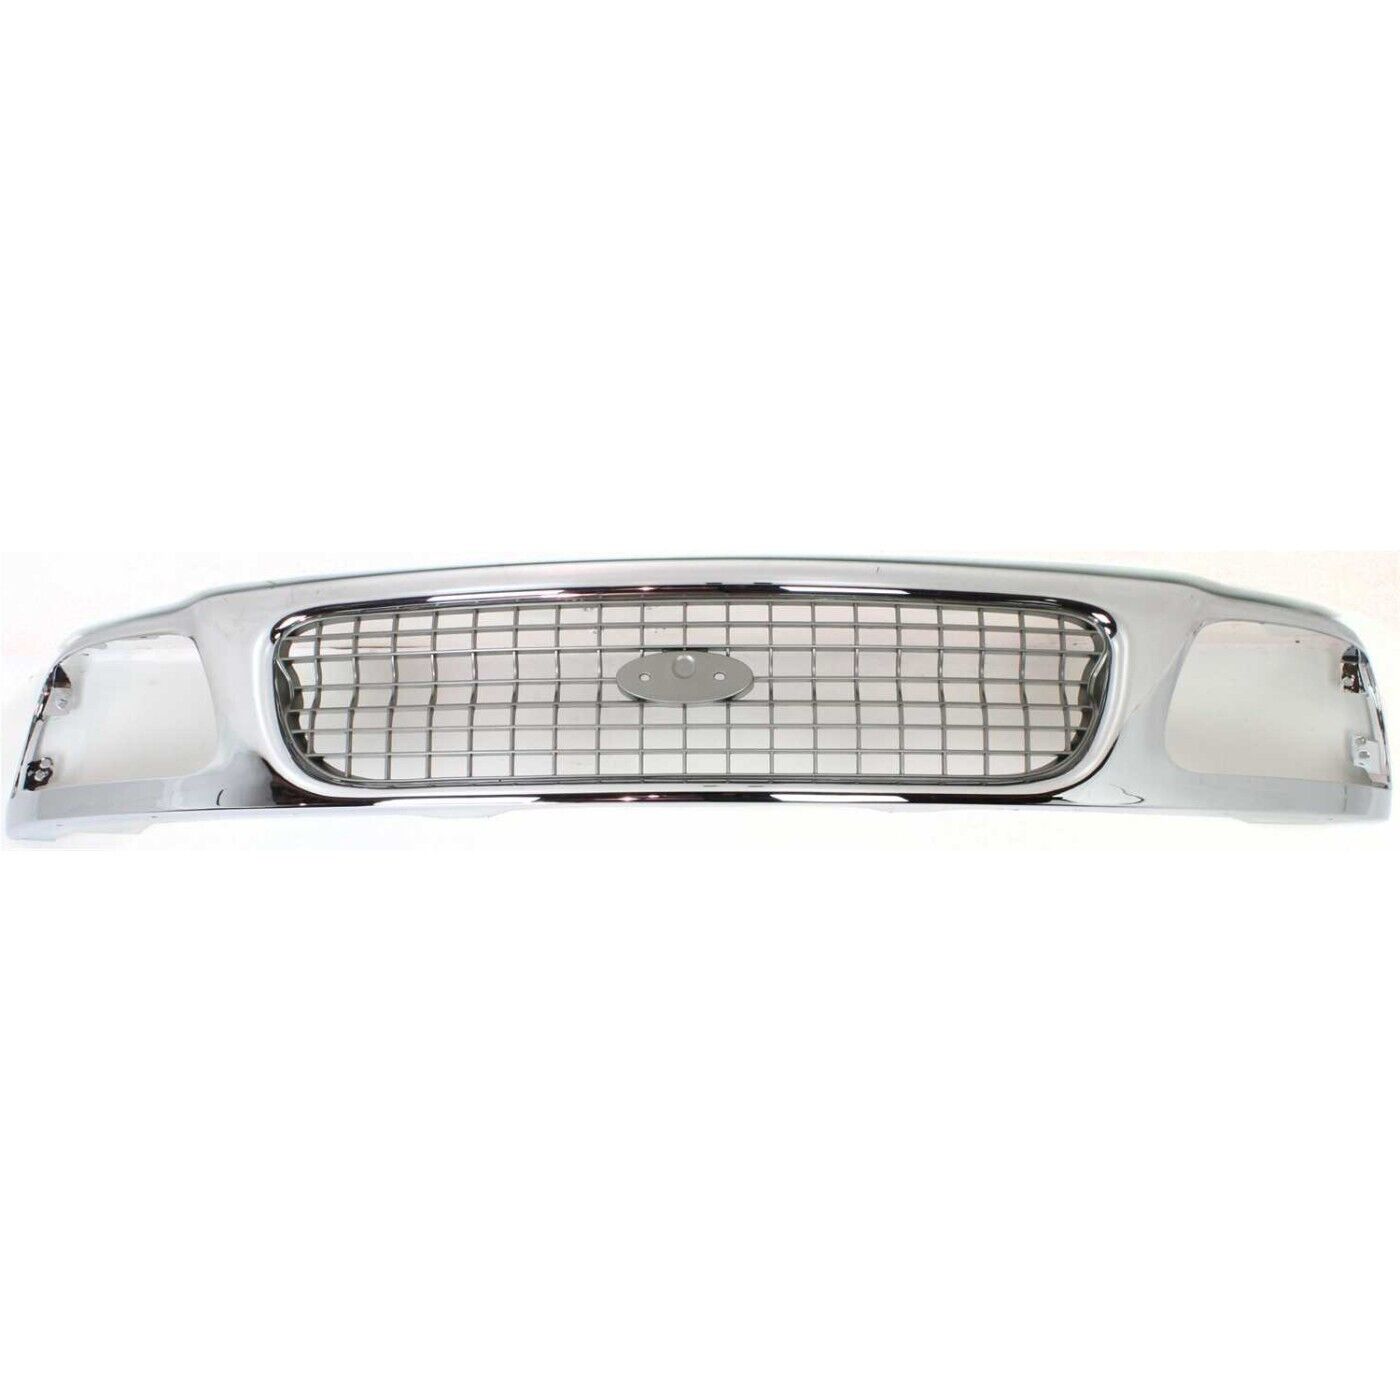 Grille For 97-98 Ford Expedition Chrome Shell w/ Silver Insert Plastic